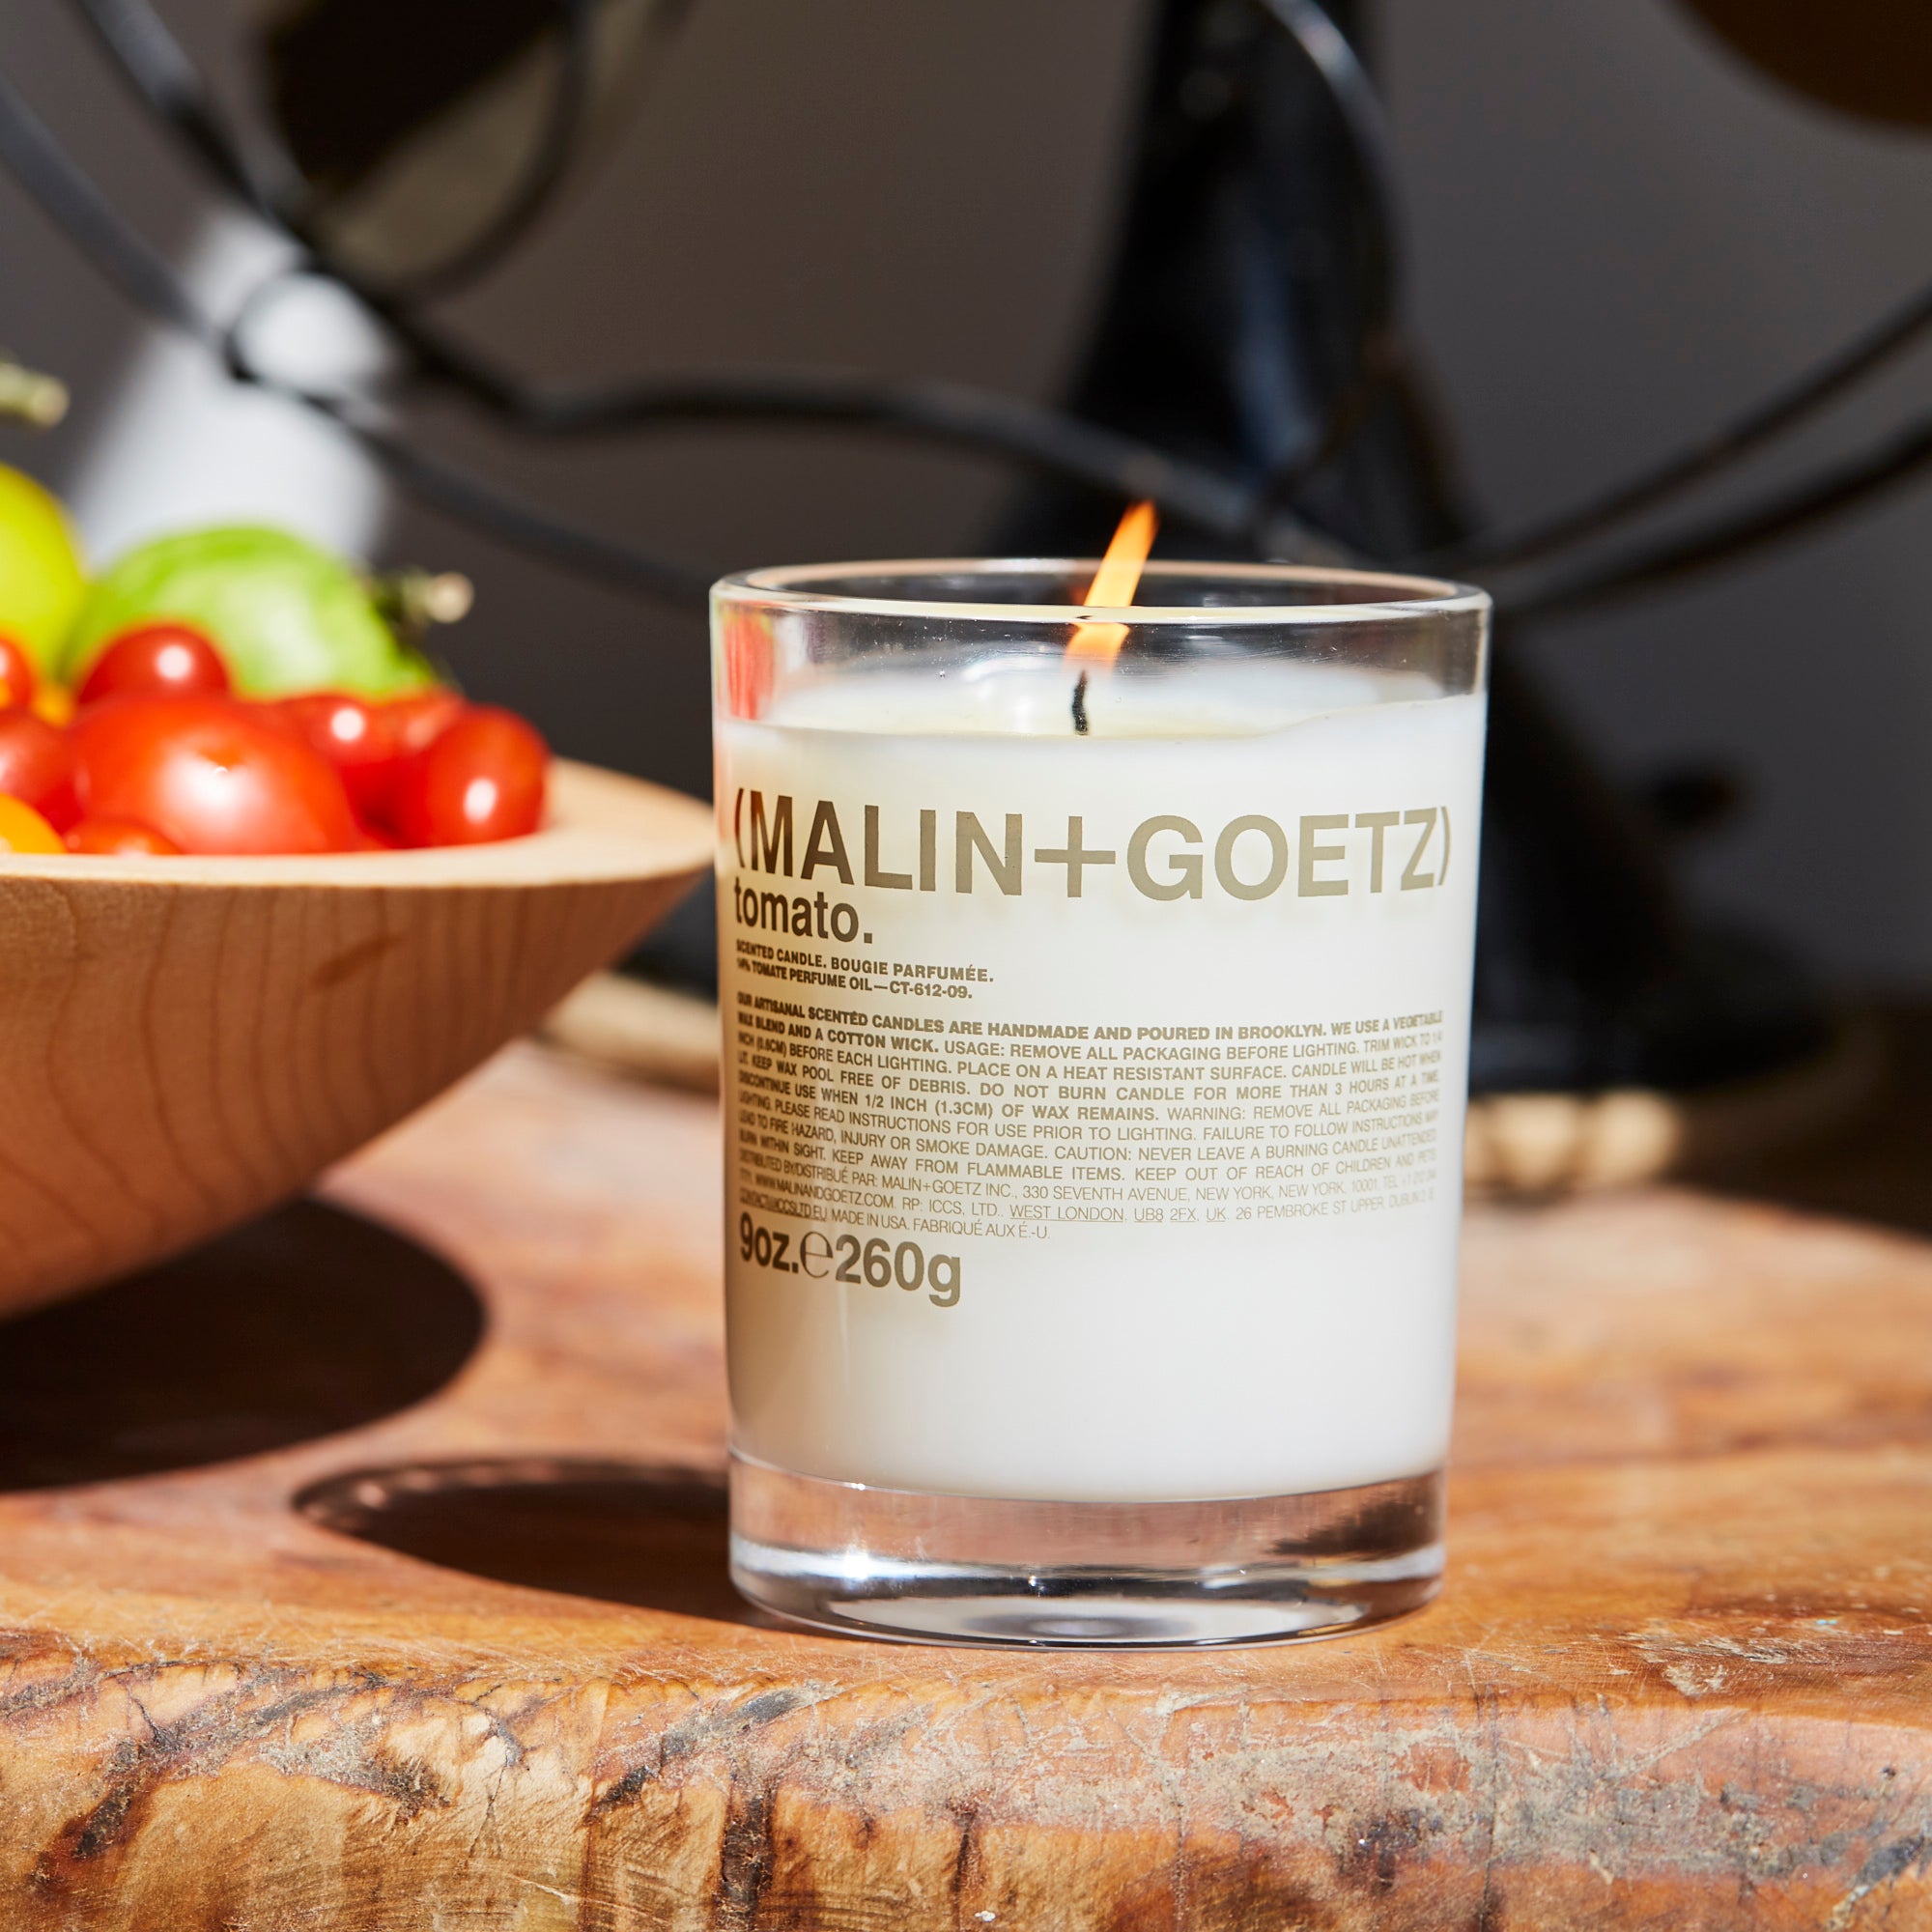 A candle will keep your desk cosy and smells great too